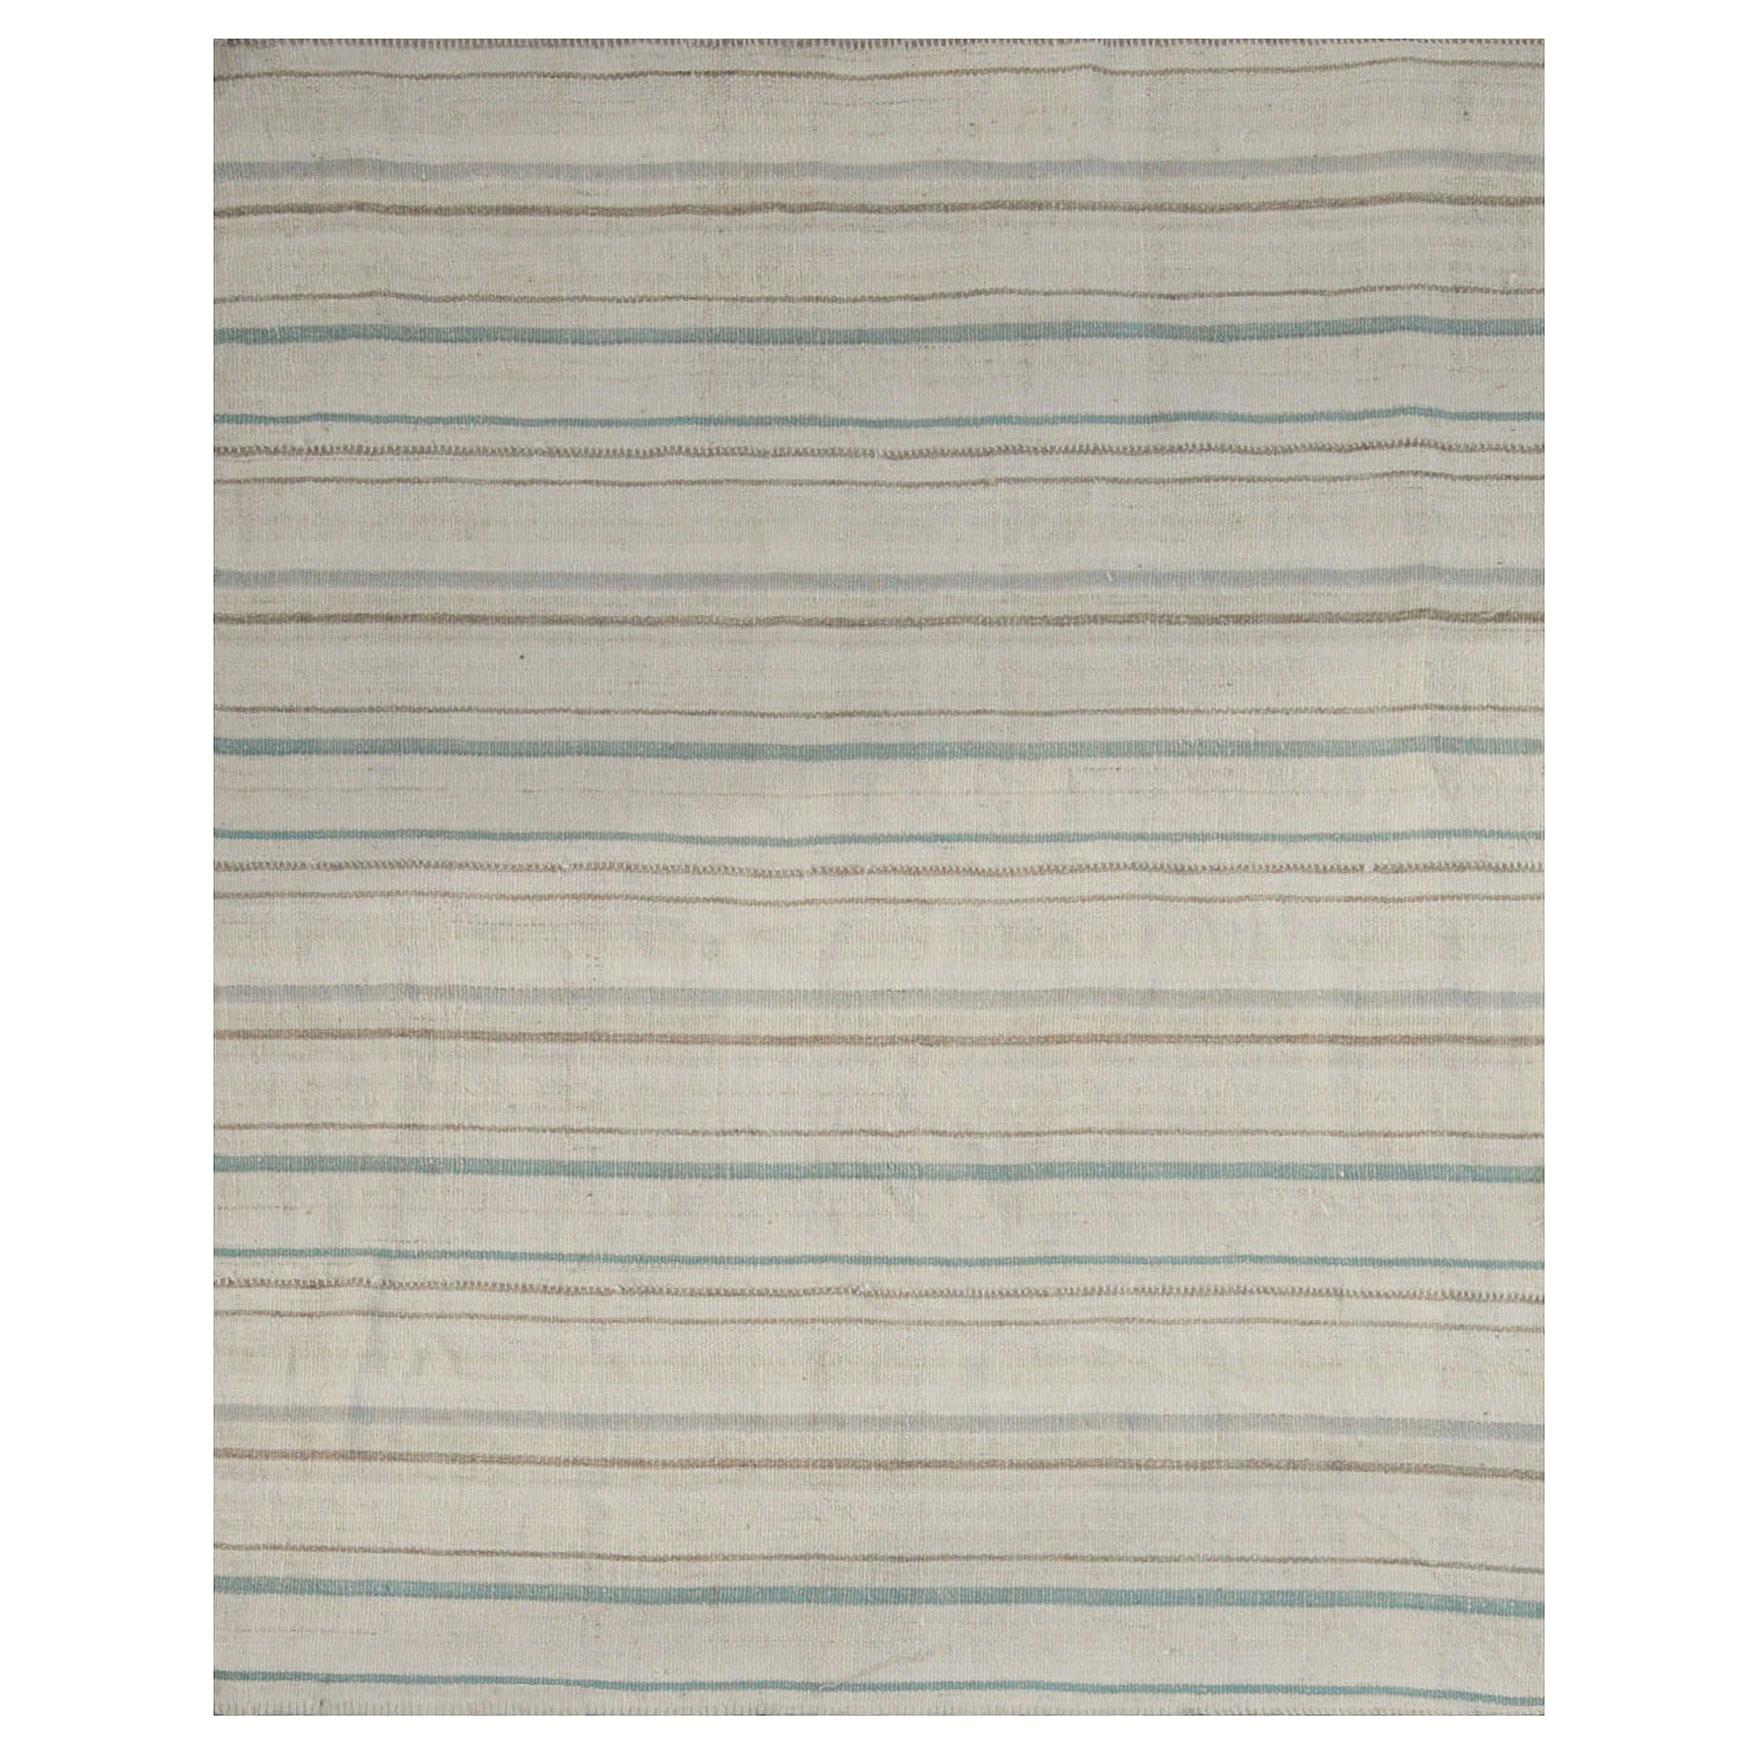 Modern Flat-Weave Kilim Rug in Ivory with Brown and Green Stripes